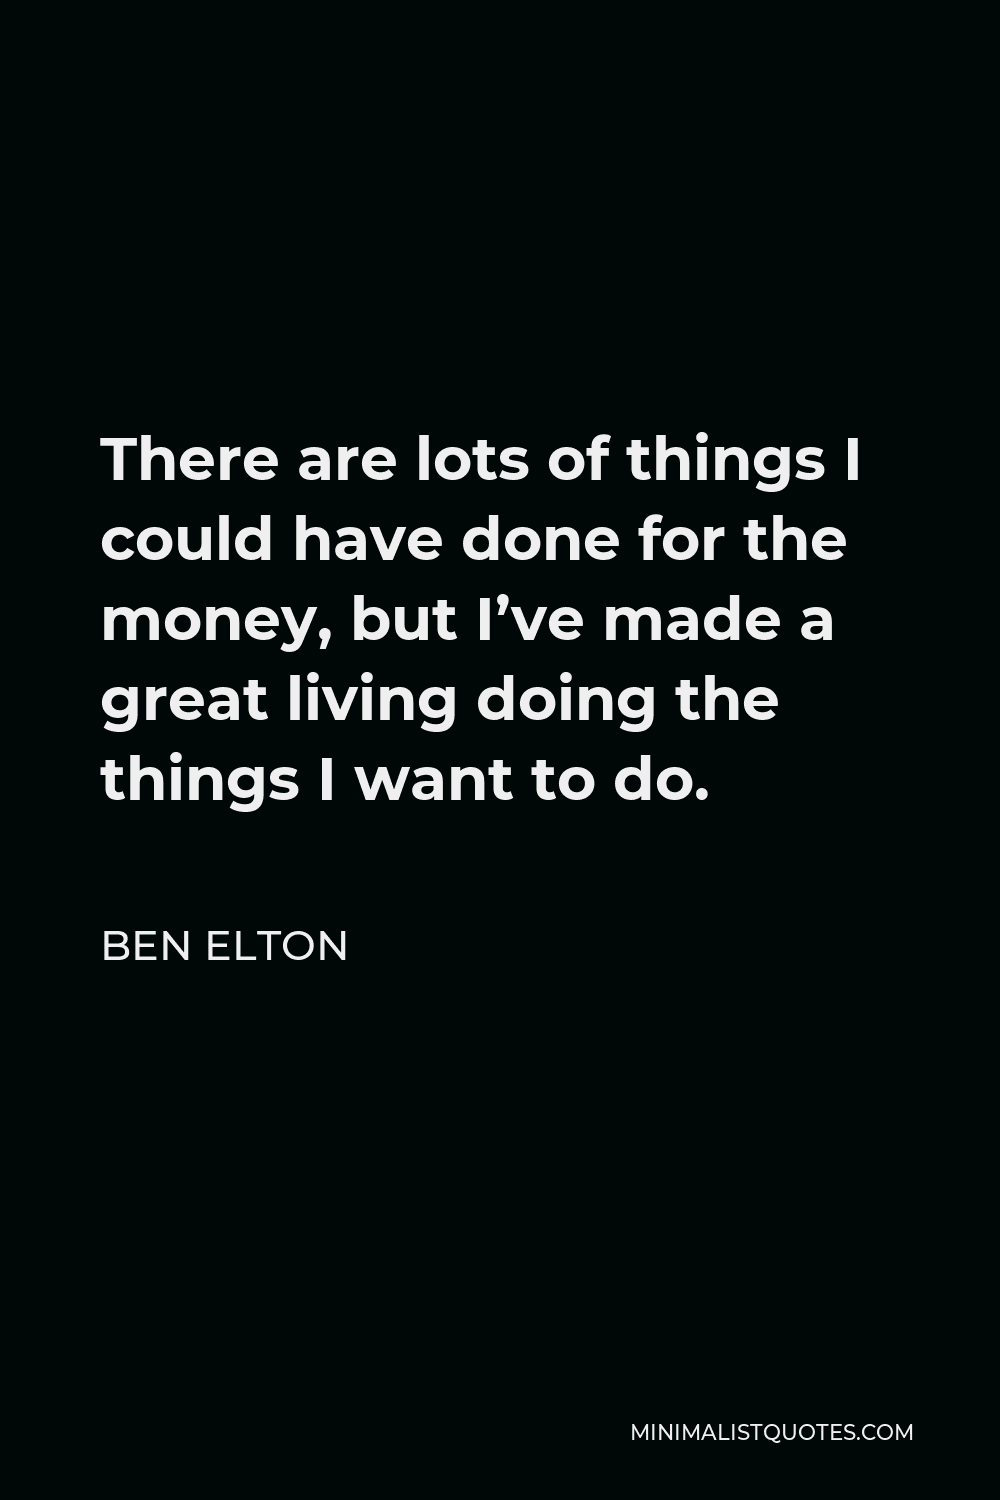 Ben Elton Quote - There are lots of things I could have done for the money, but I’ve made a great living doing the things I want to do.